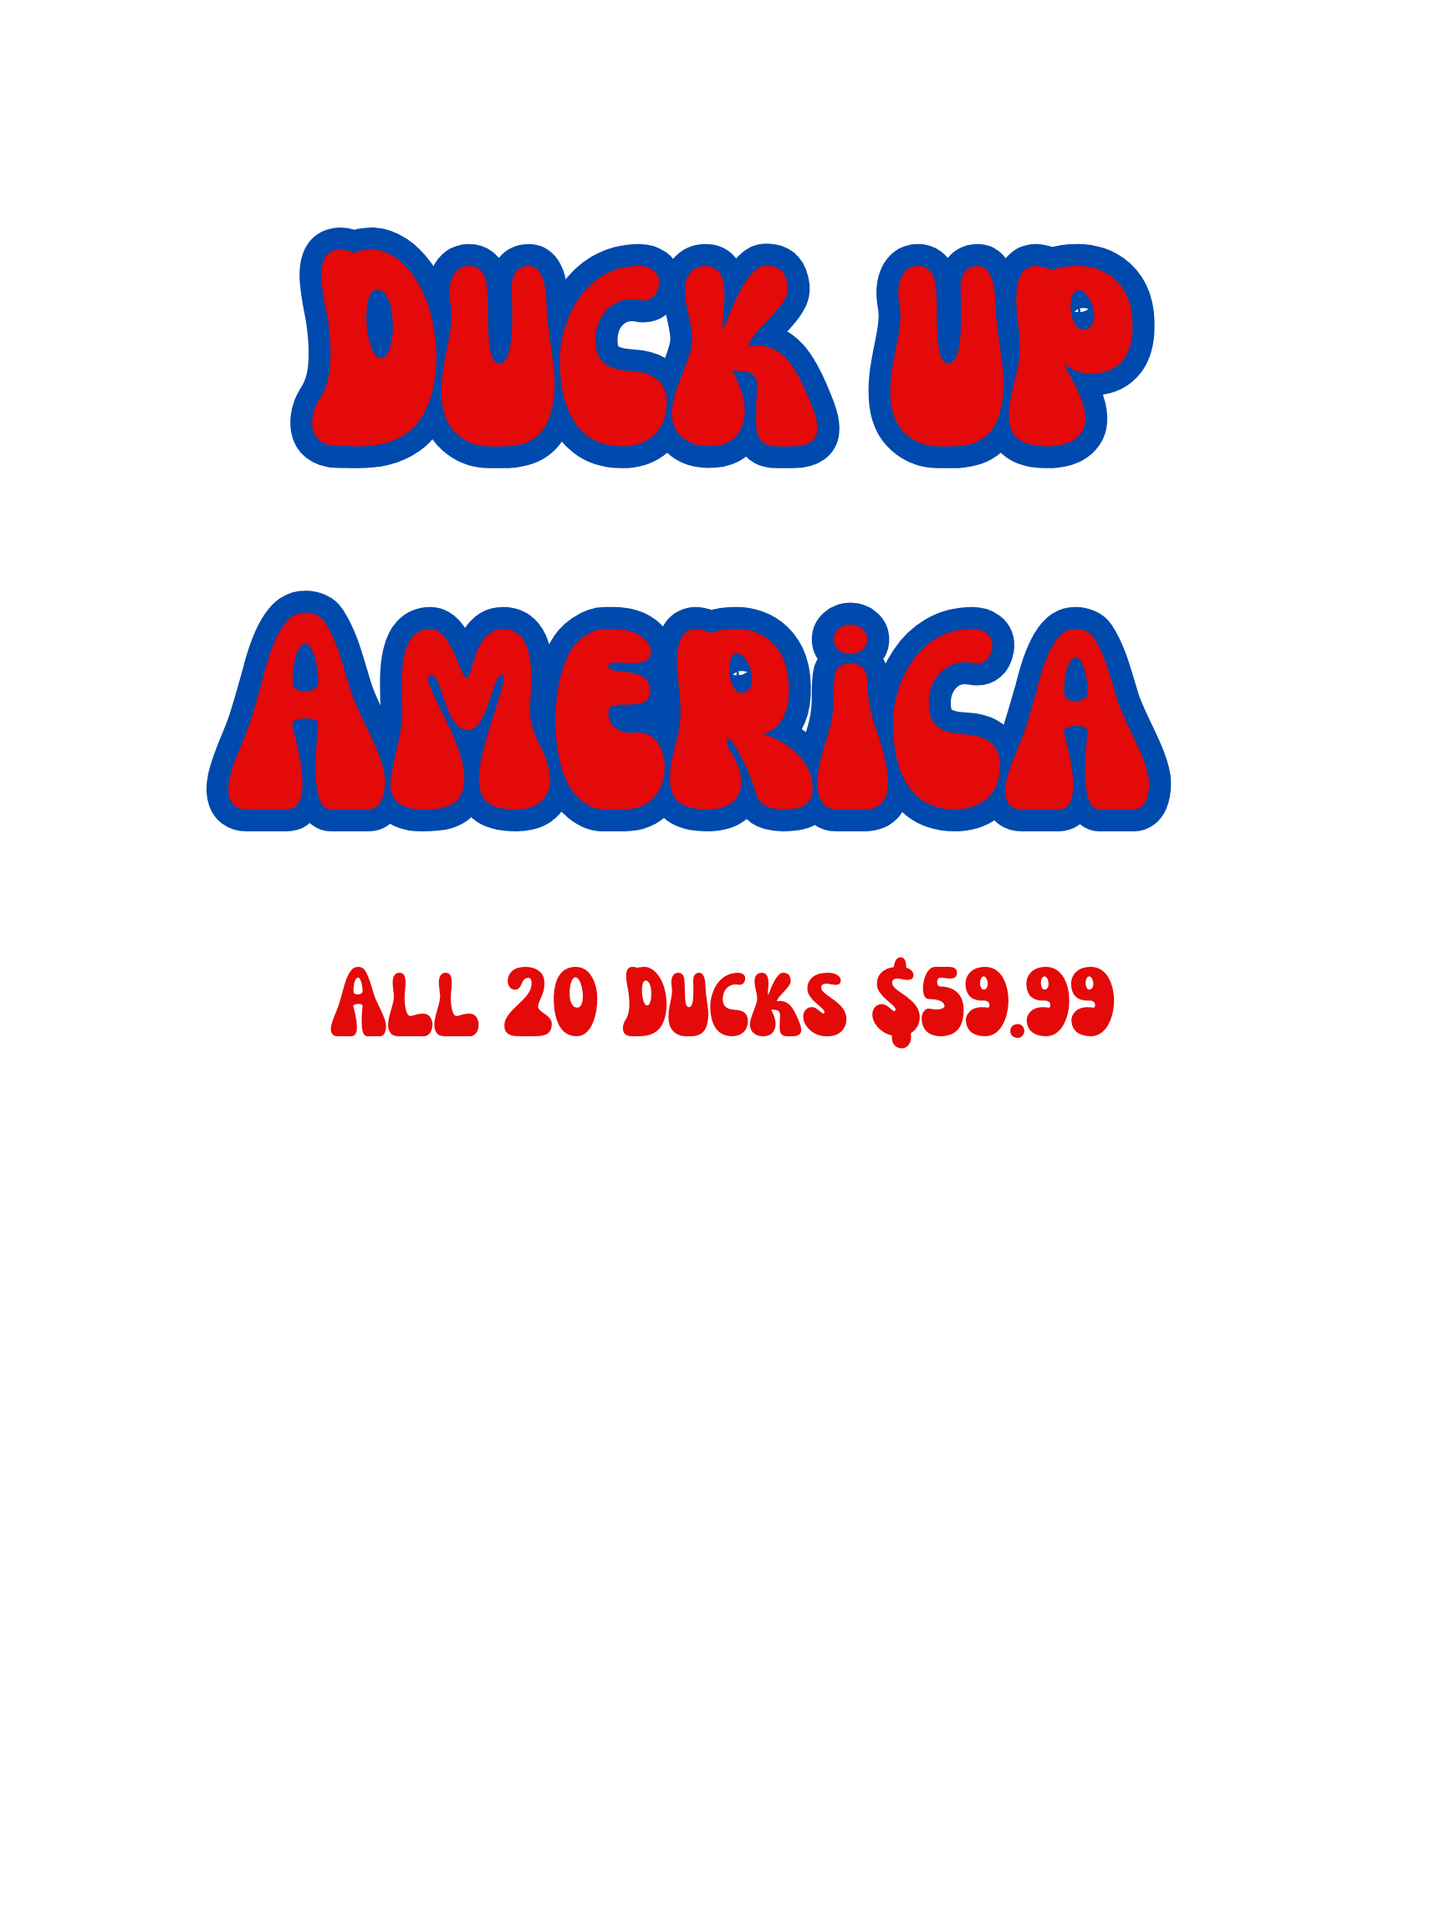 DUCK UP AMERICA SPECIAL TRAIN